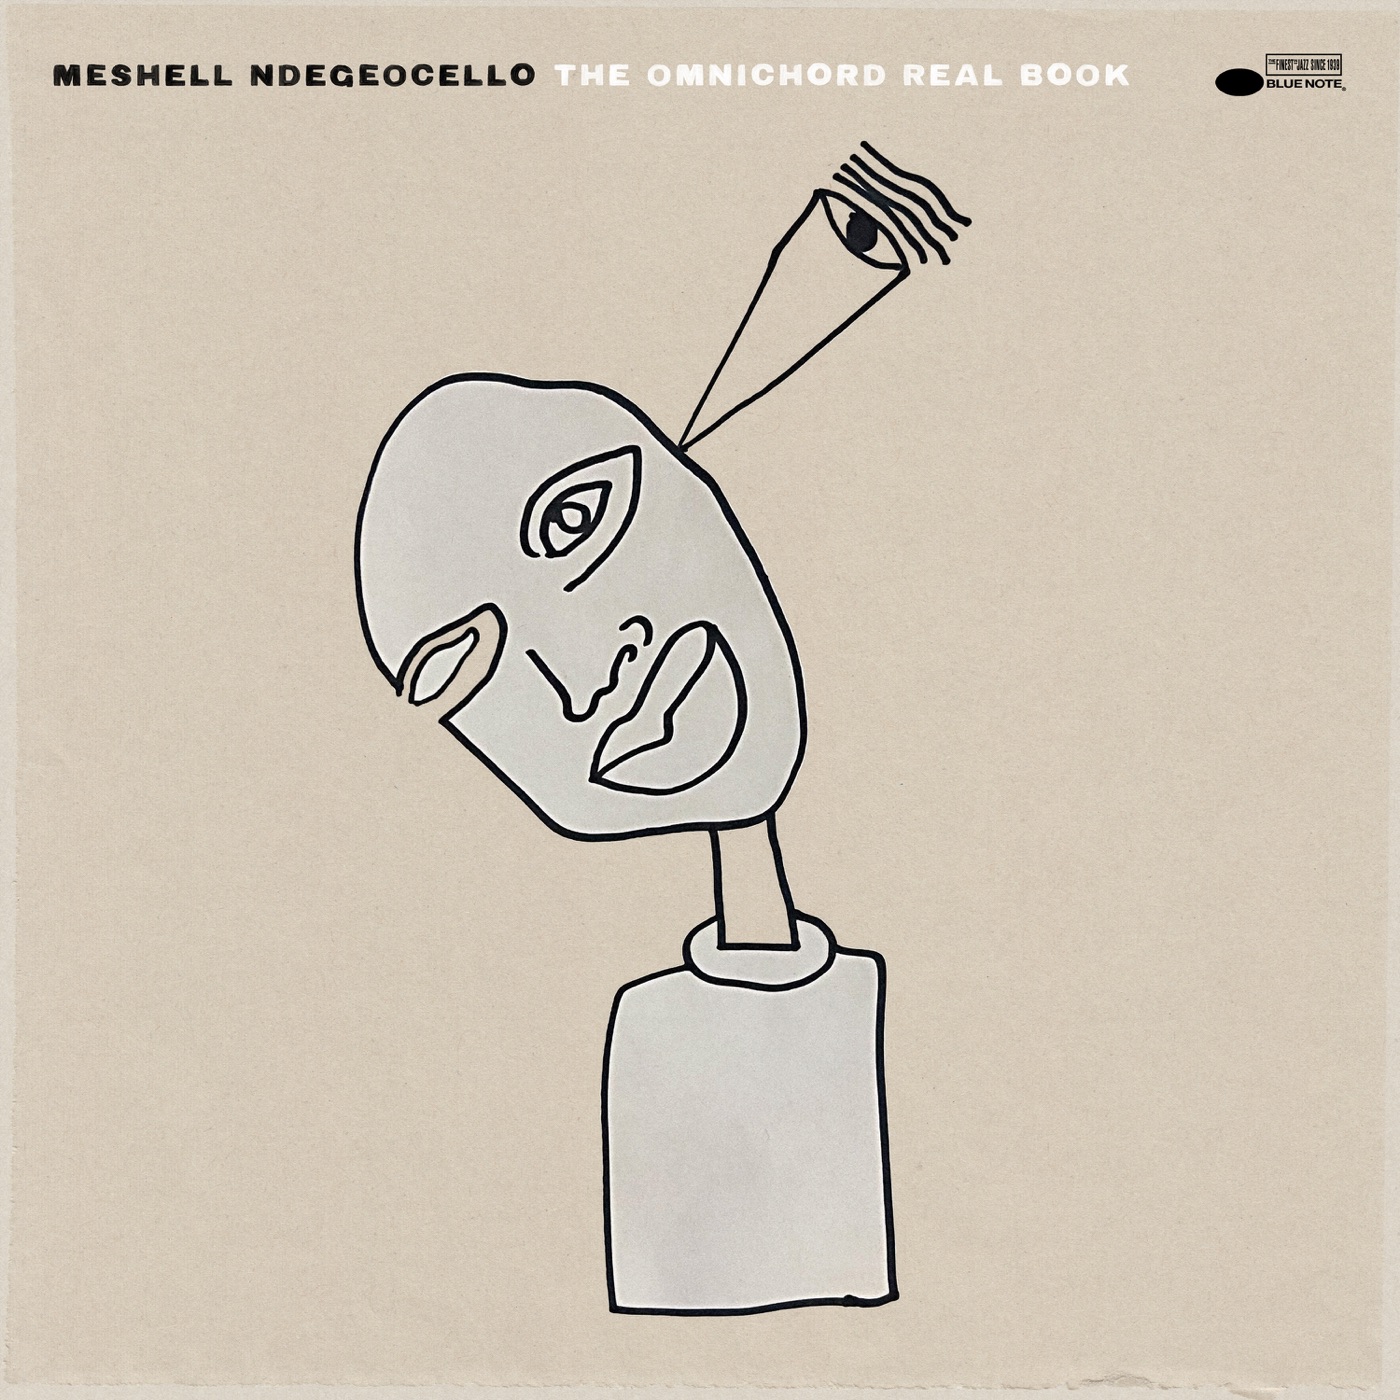 The Omnichord Real Book by Meshell Ndegeocello